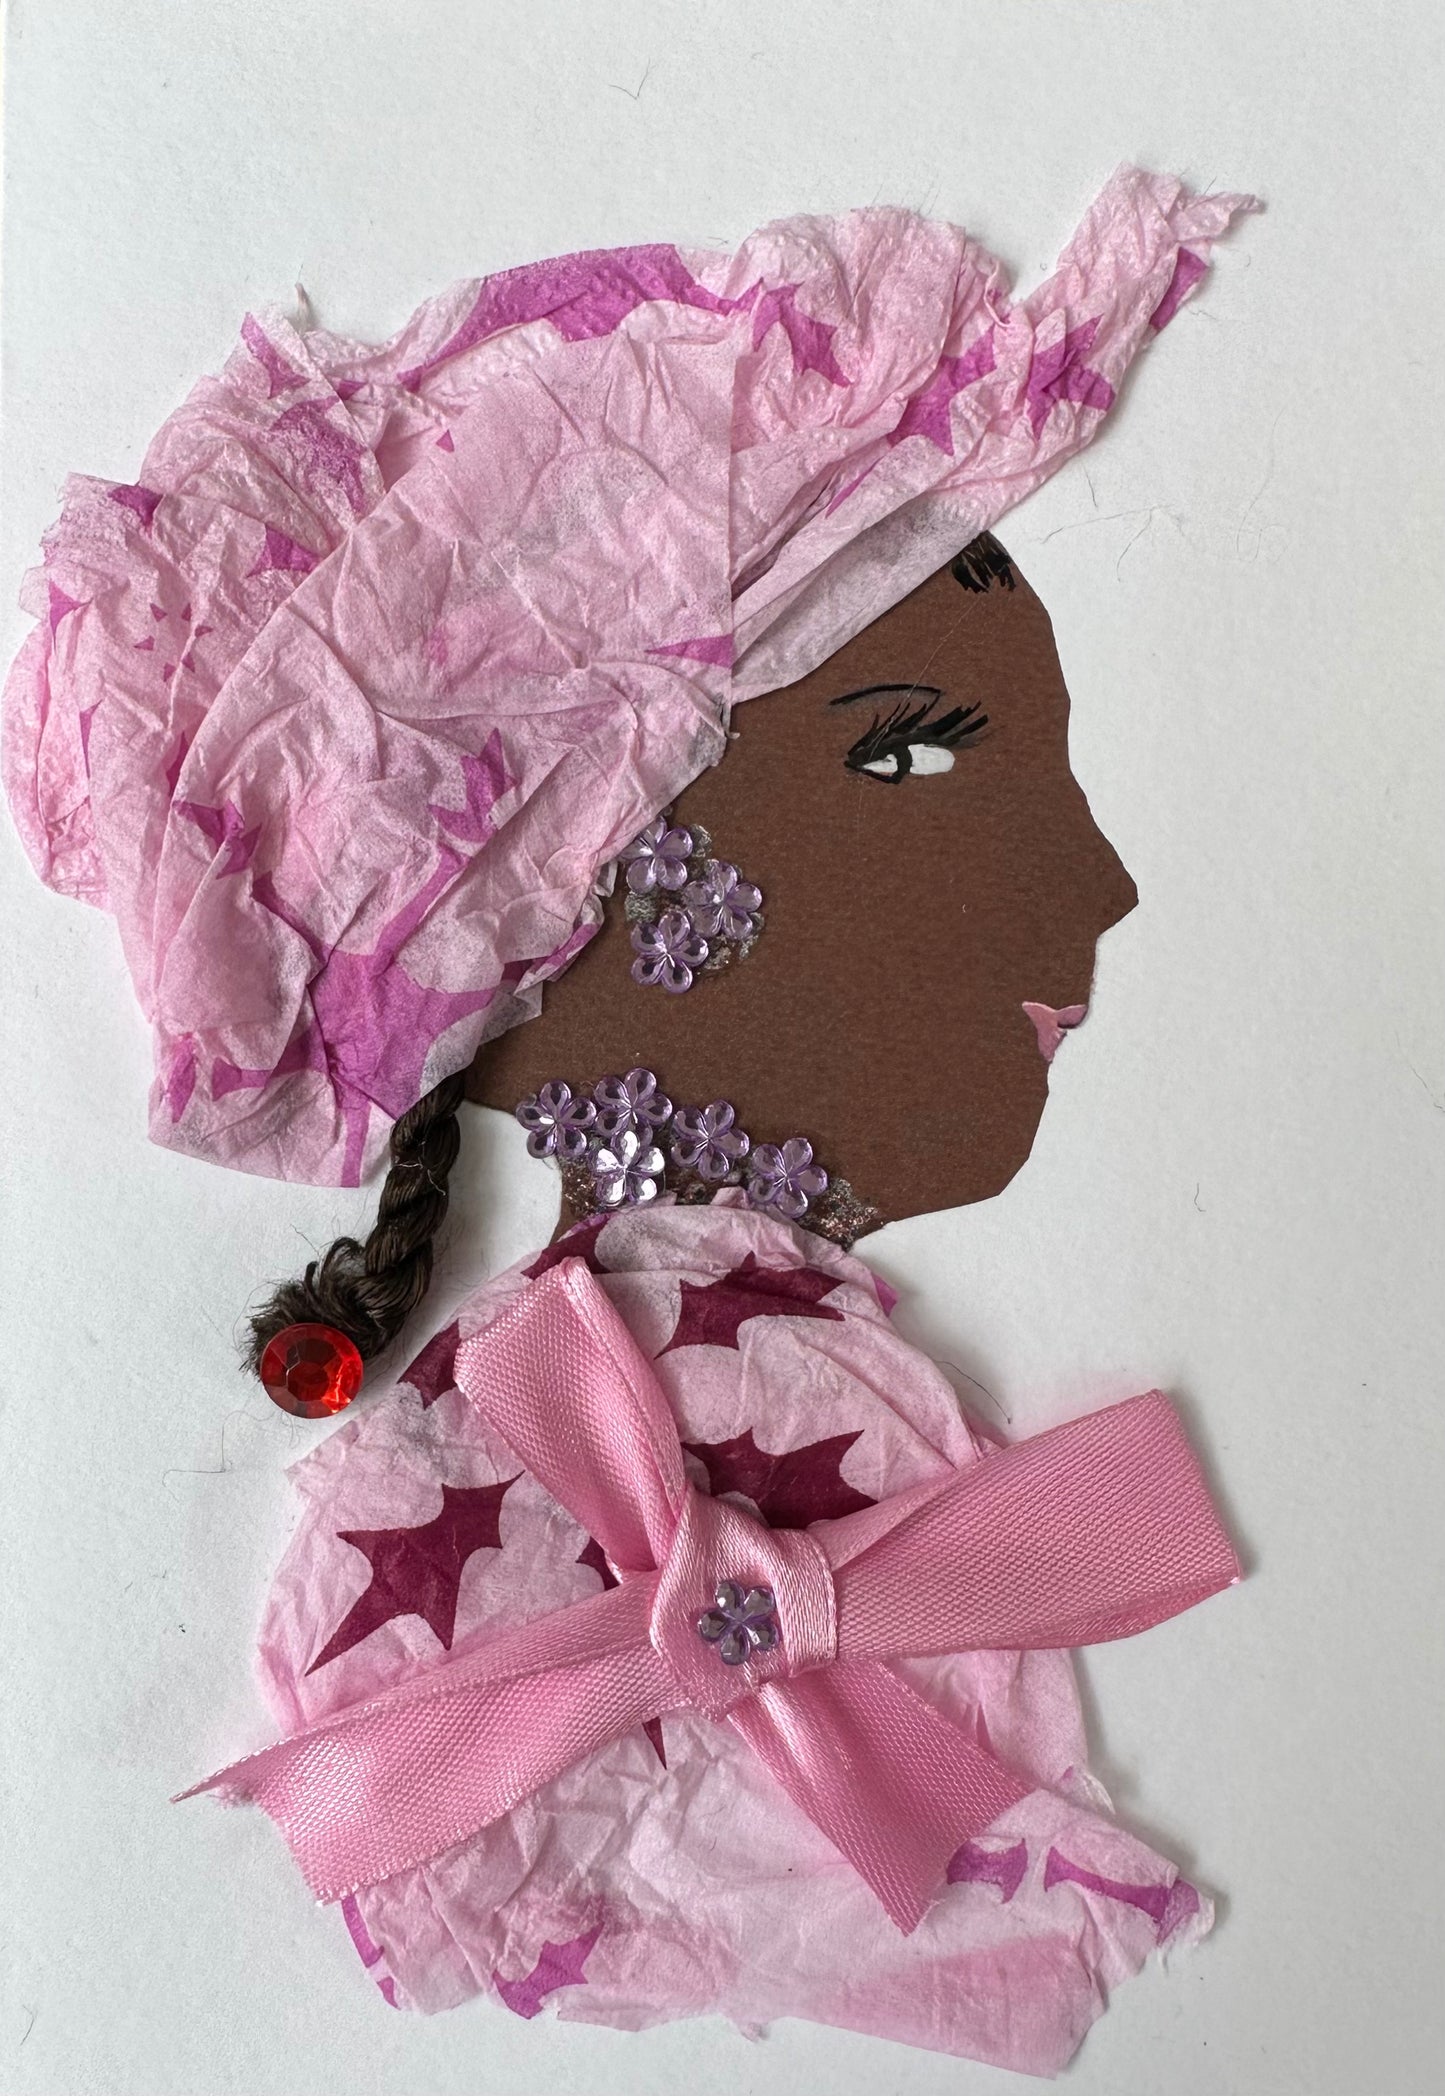 I designed this handmade card of a woman named Euston Evelyn. She is dressed in a pink blouse and hatinator. The blouse is tied together with a pink ribbon and has a light purple flower gemstone in the center. Her jewellery is also made up of the same light purple gemstones, and her hair is pinned together with a ruby red gemstone.